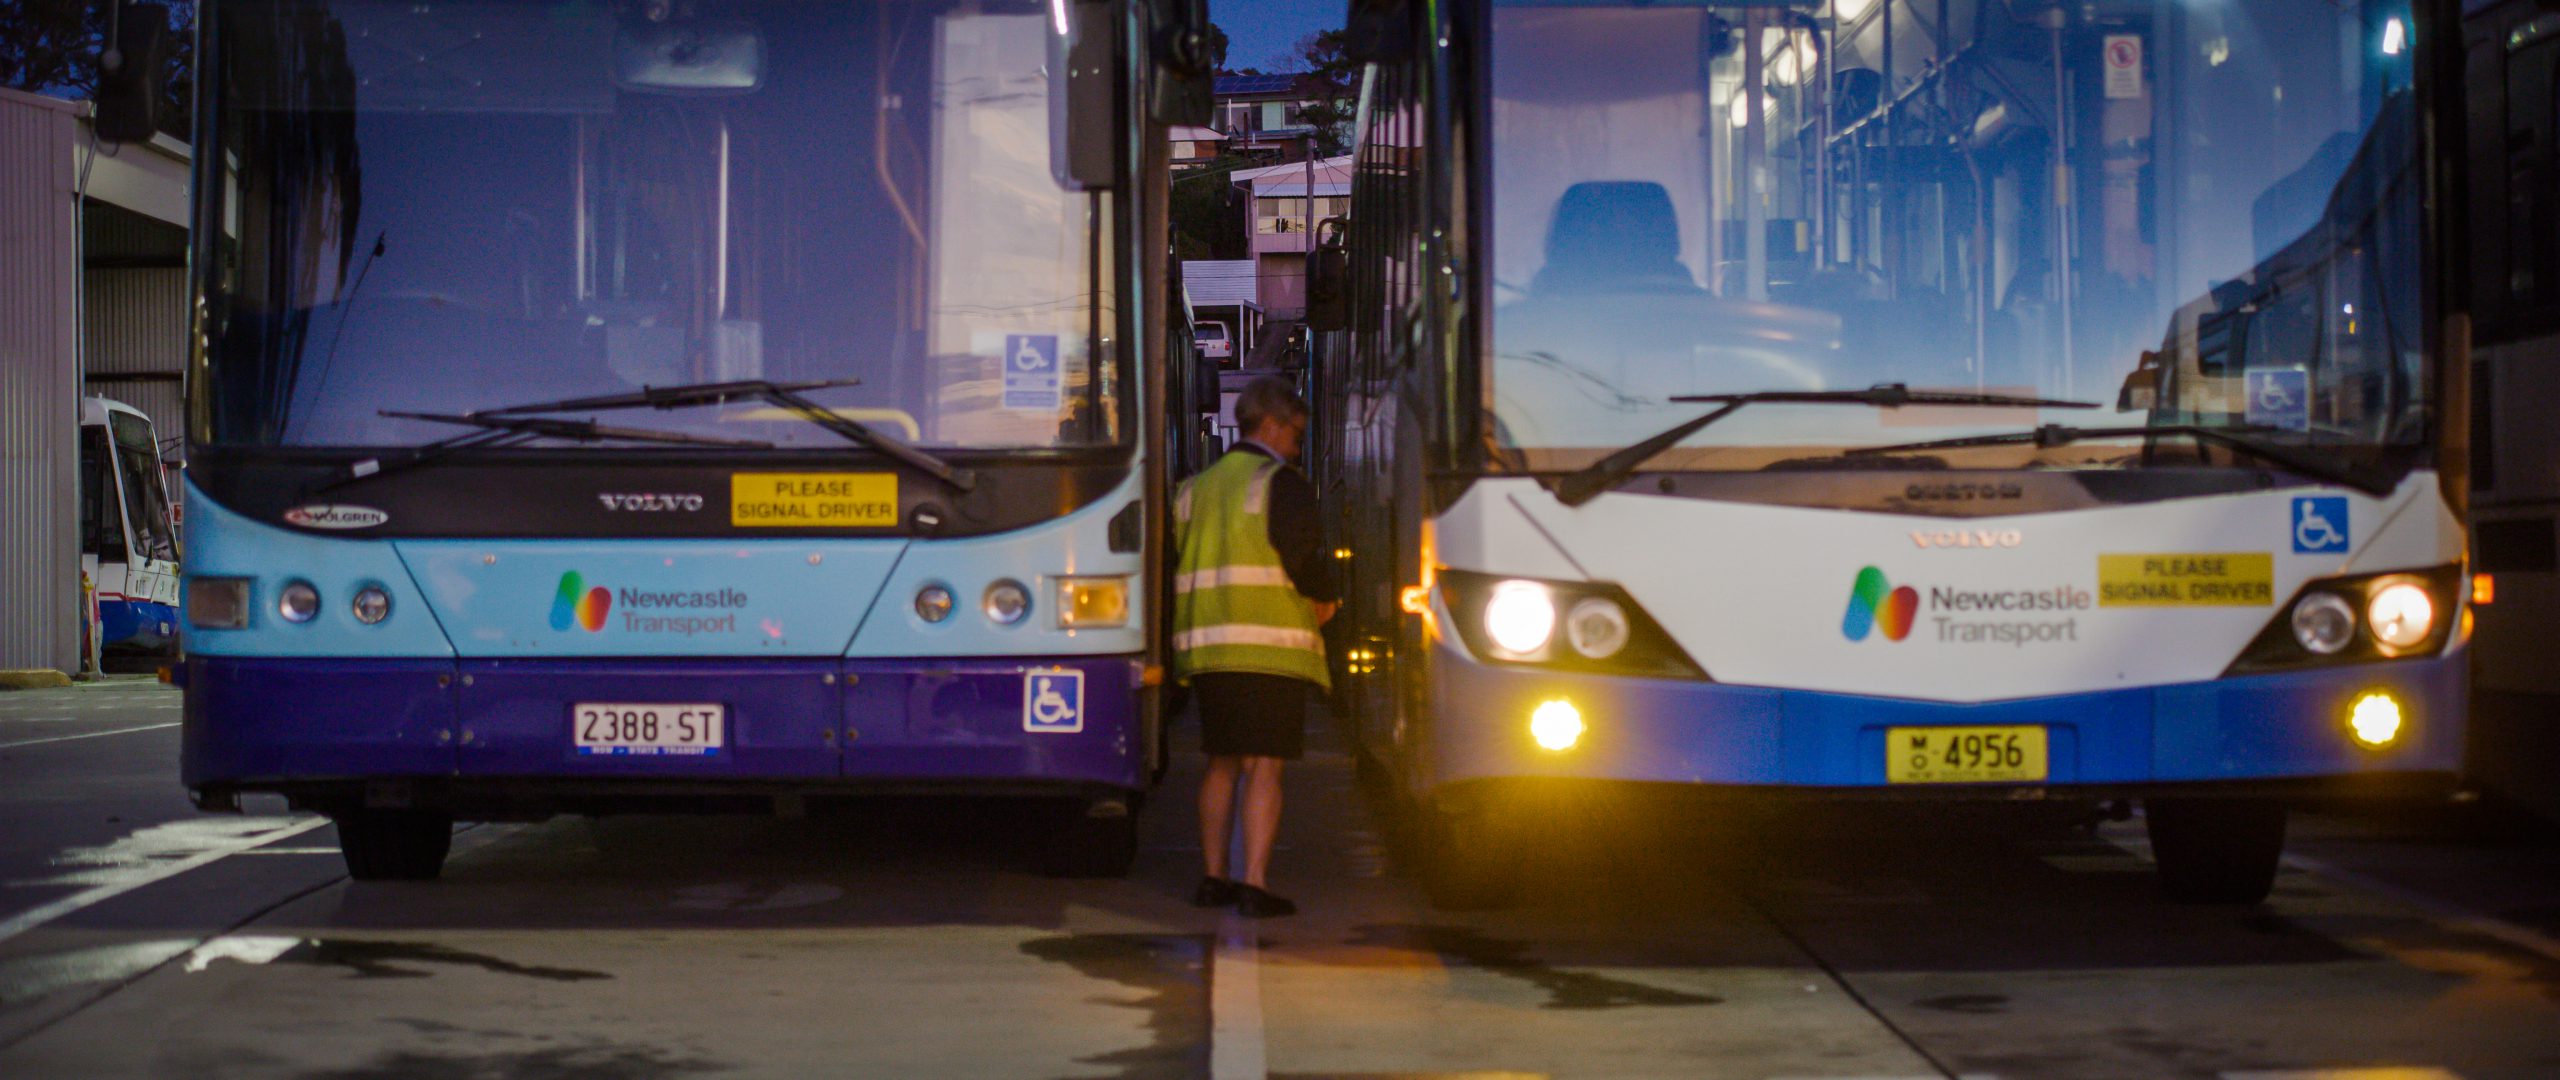 MORE SERVICES FOR NEWCASTLE TRANSPORT NETWORK